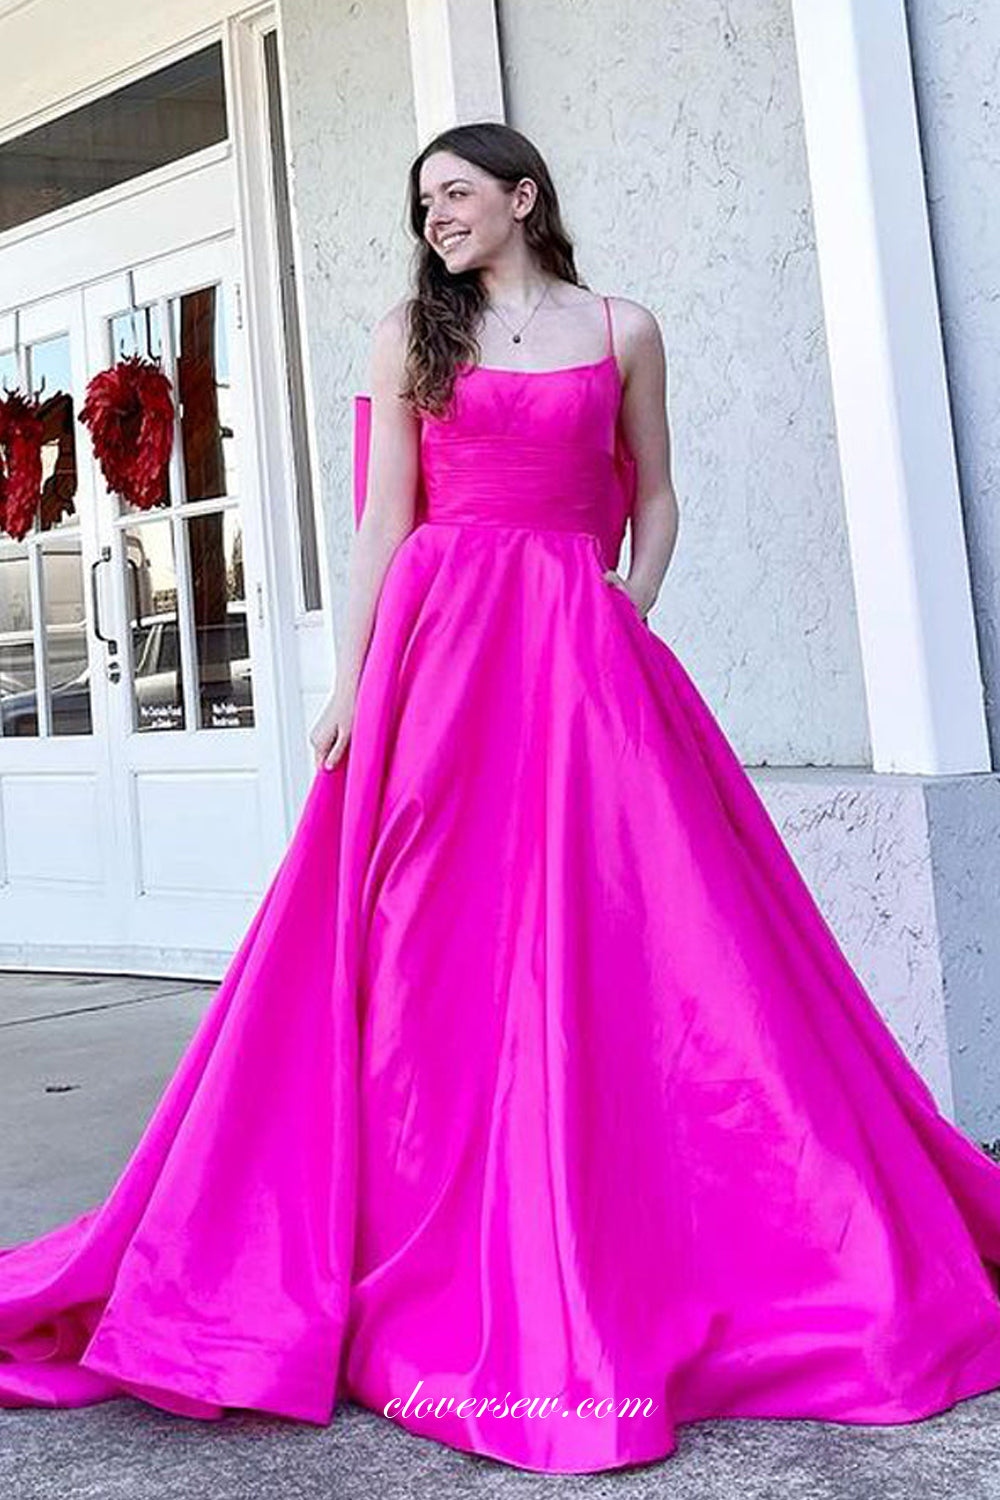 Rose Pink Satin Sleeveless With Big Bowknot Back A-line Prom Dresses, CP1123